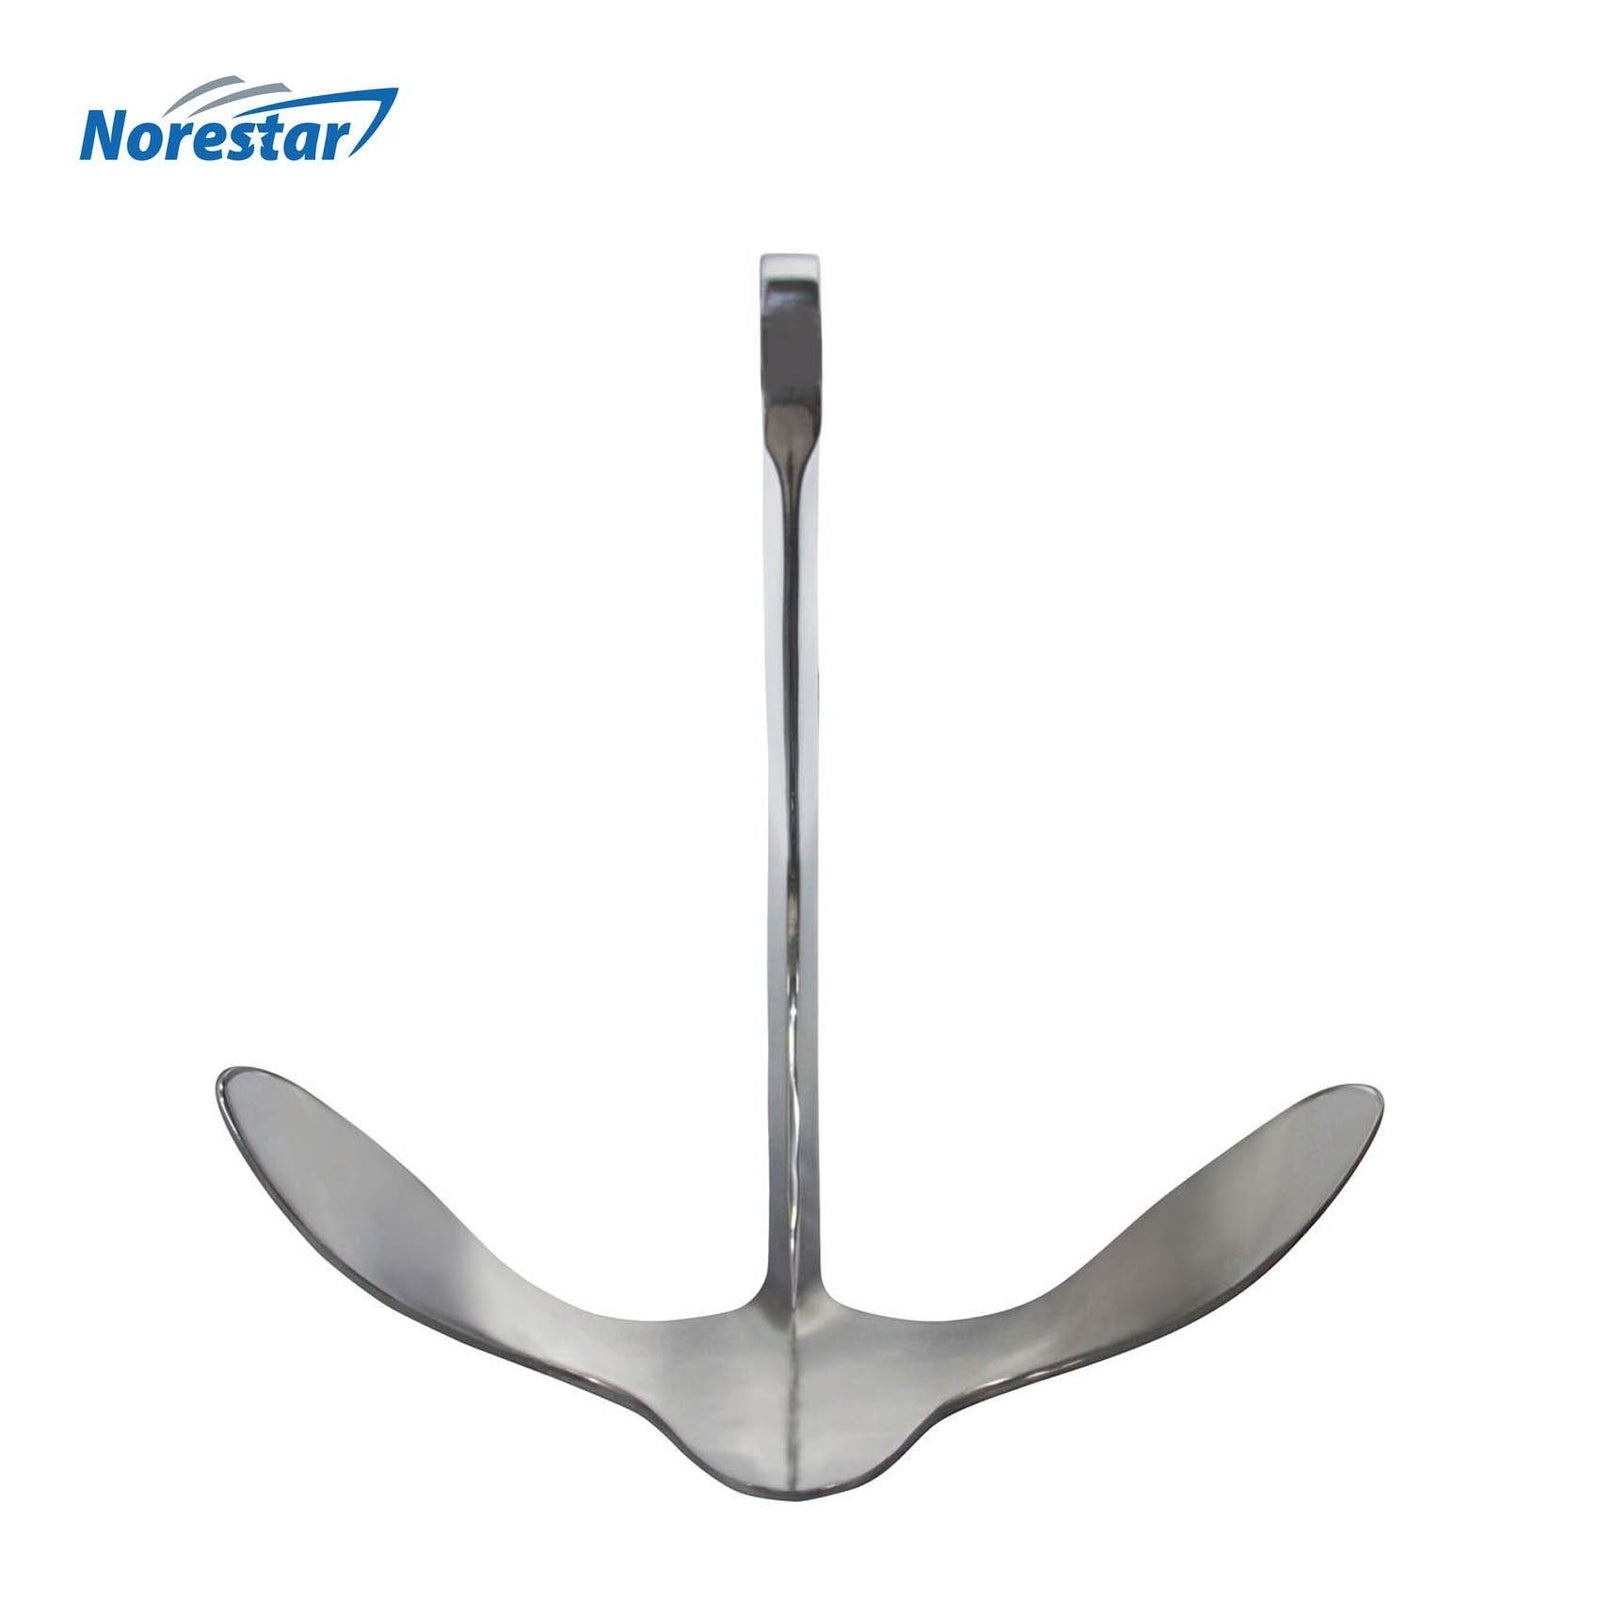 Stainless Steel Bruce/Claw Boat Anchor by Norestar - Front